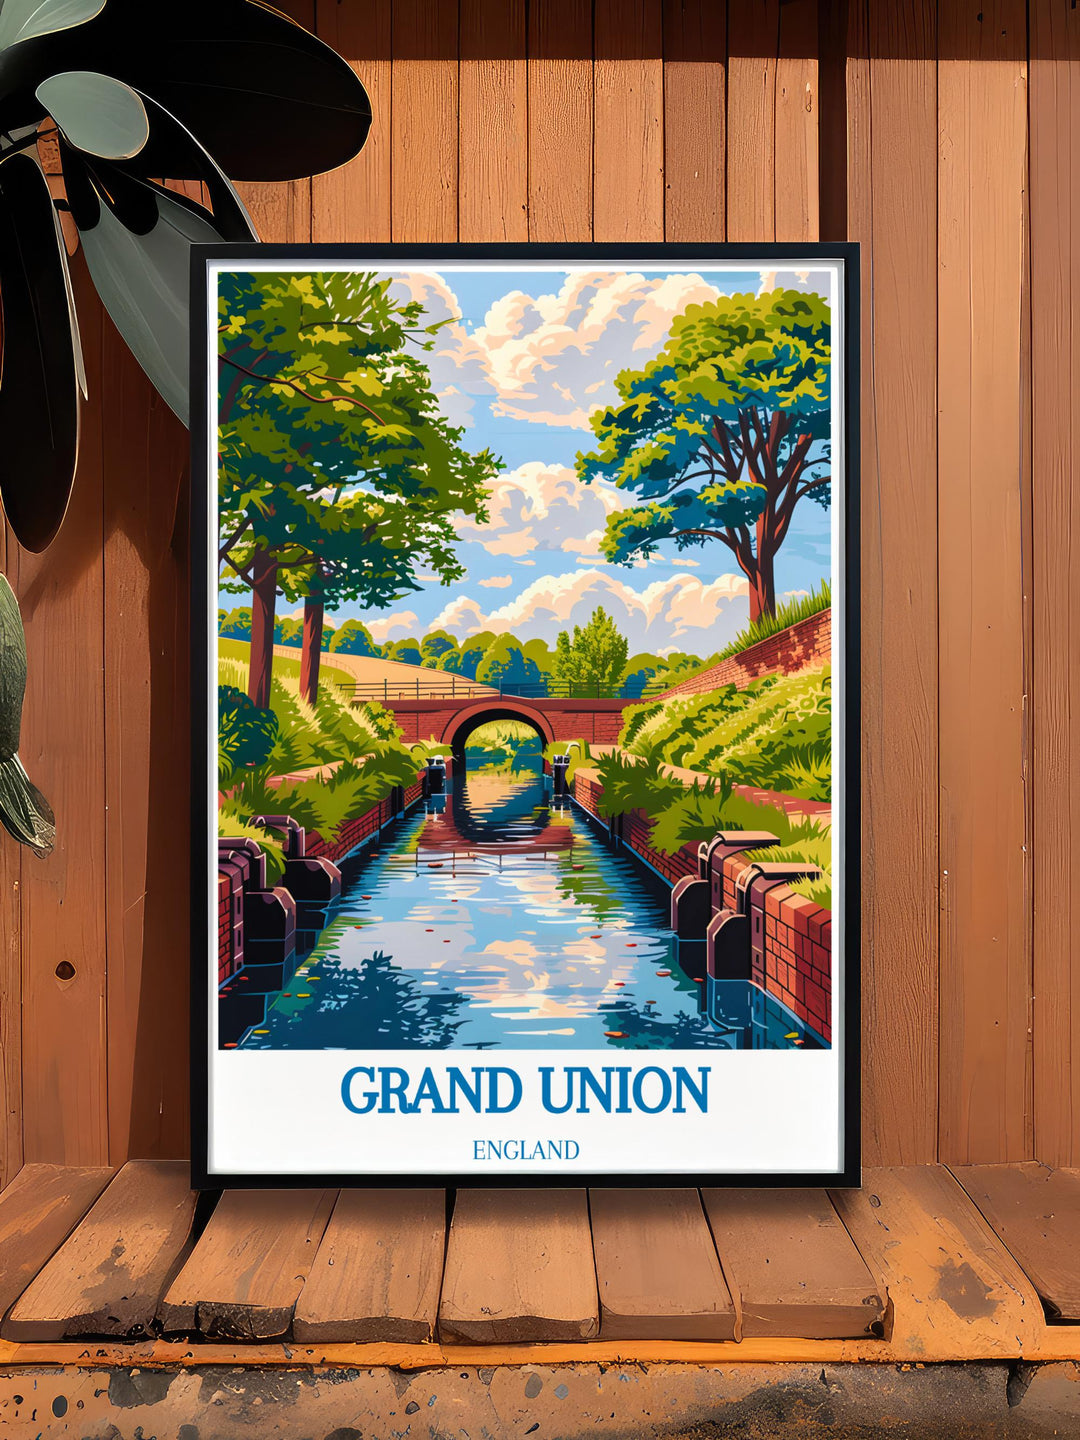 Colorful depiction of narrowboats on Grand Union Canal, reflecting the vibrant boating culture in England, great for canal poster art enthusiasts.